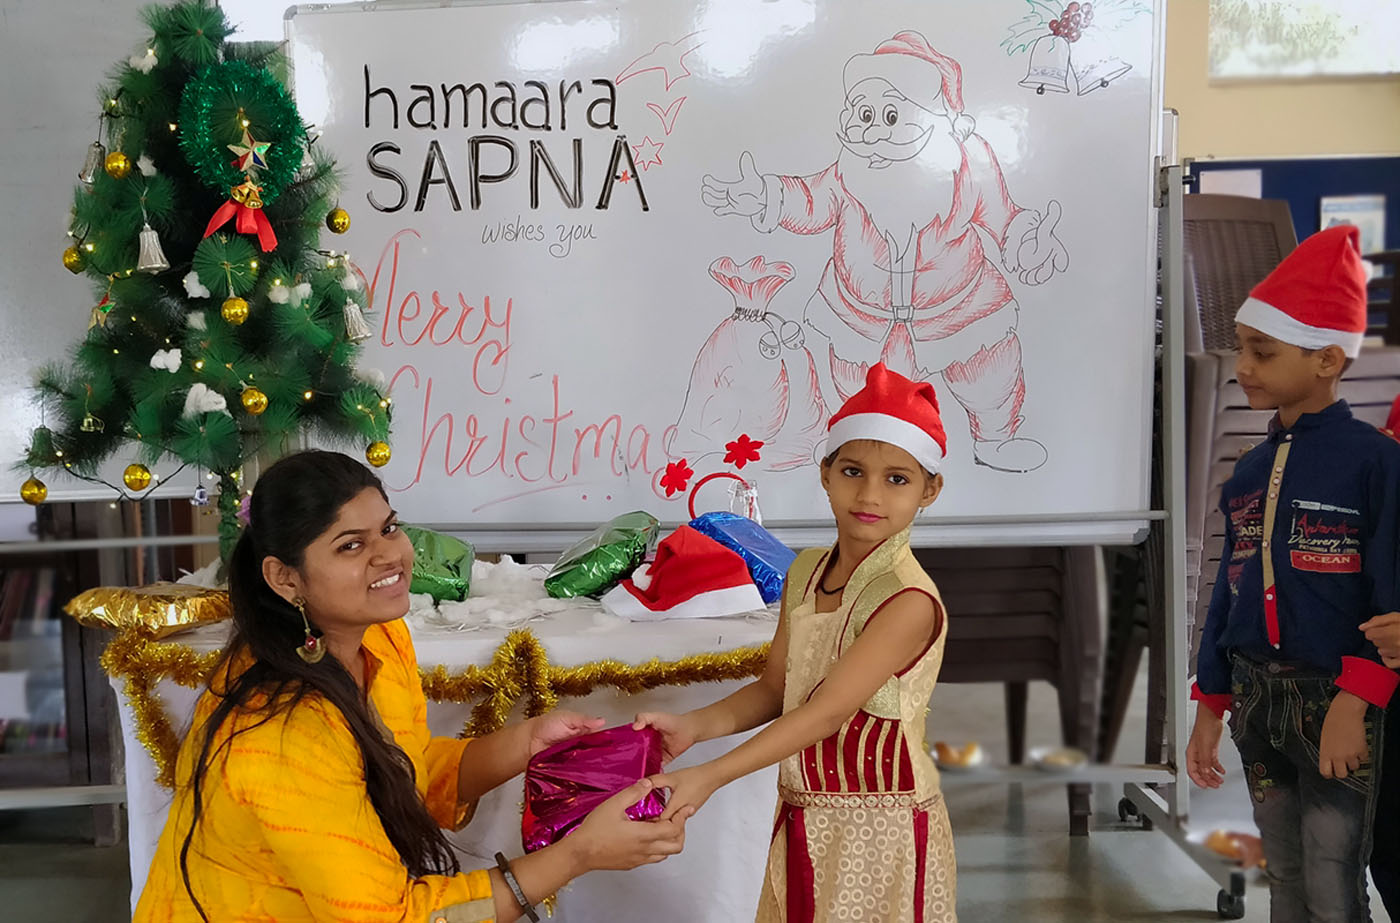 All the children receiving a gift from Hamaara Sapna in the Christmas Party